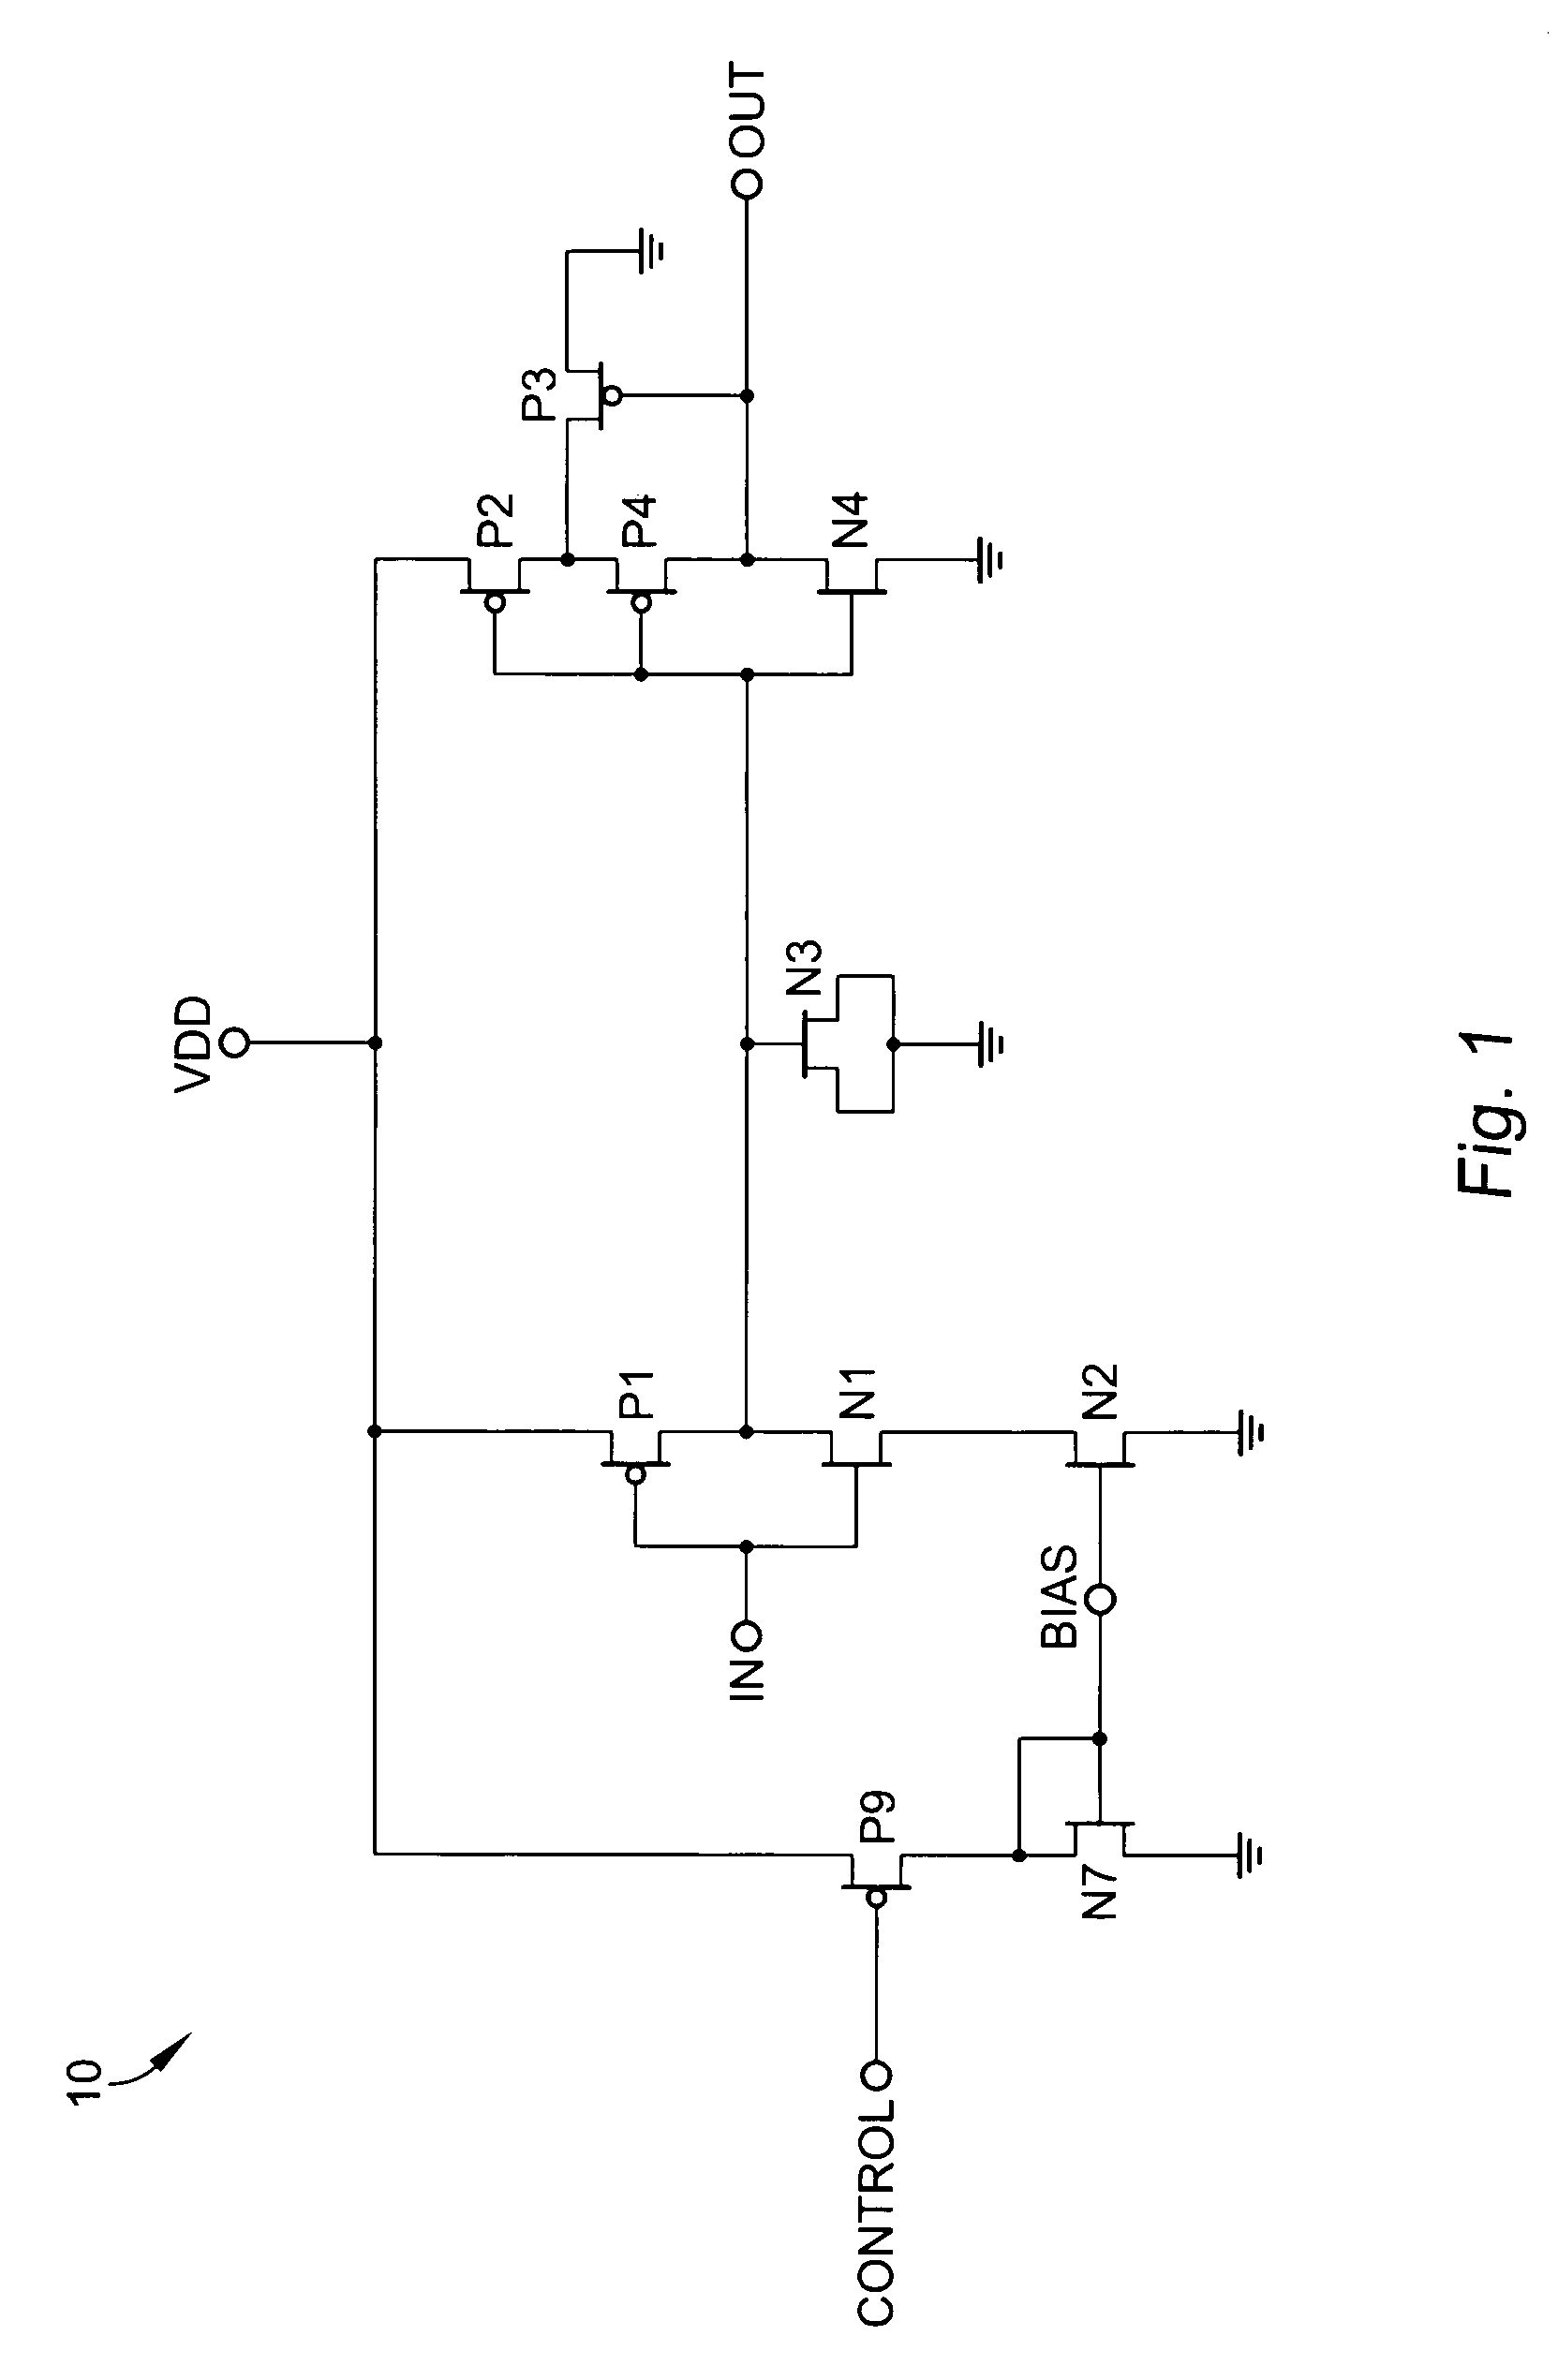 SET and SEGR resistant delay cell and delay line for Power-On Reset circuit applications